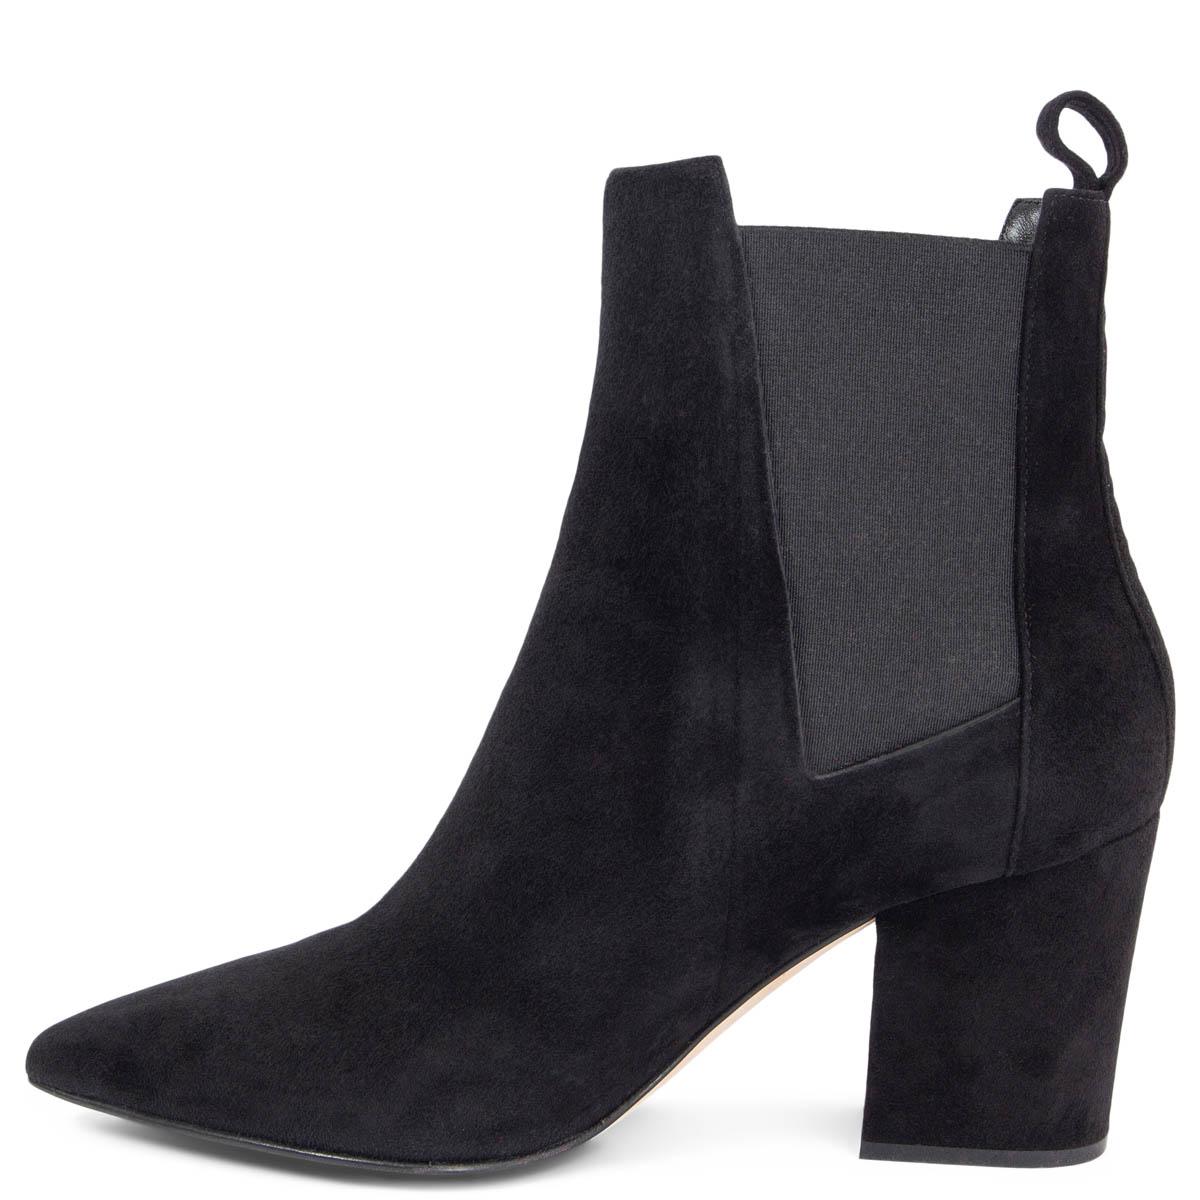 Black SERGIO ROSSI black suede BLOCK HEEL ANKLE Boots Shoes 38 For Sale